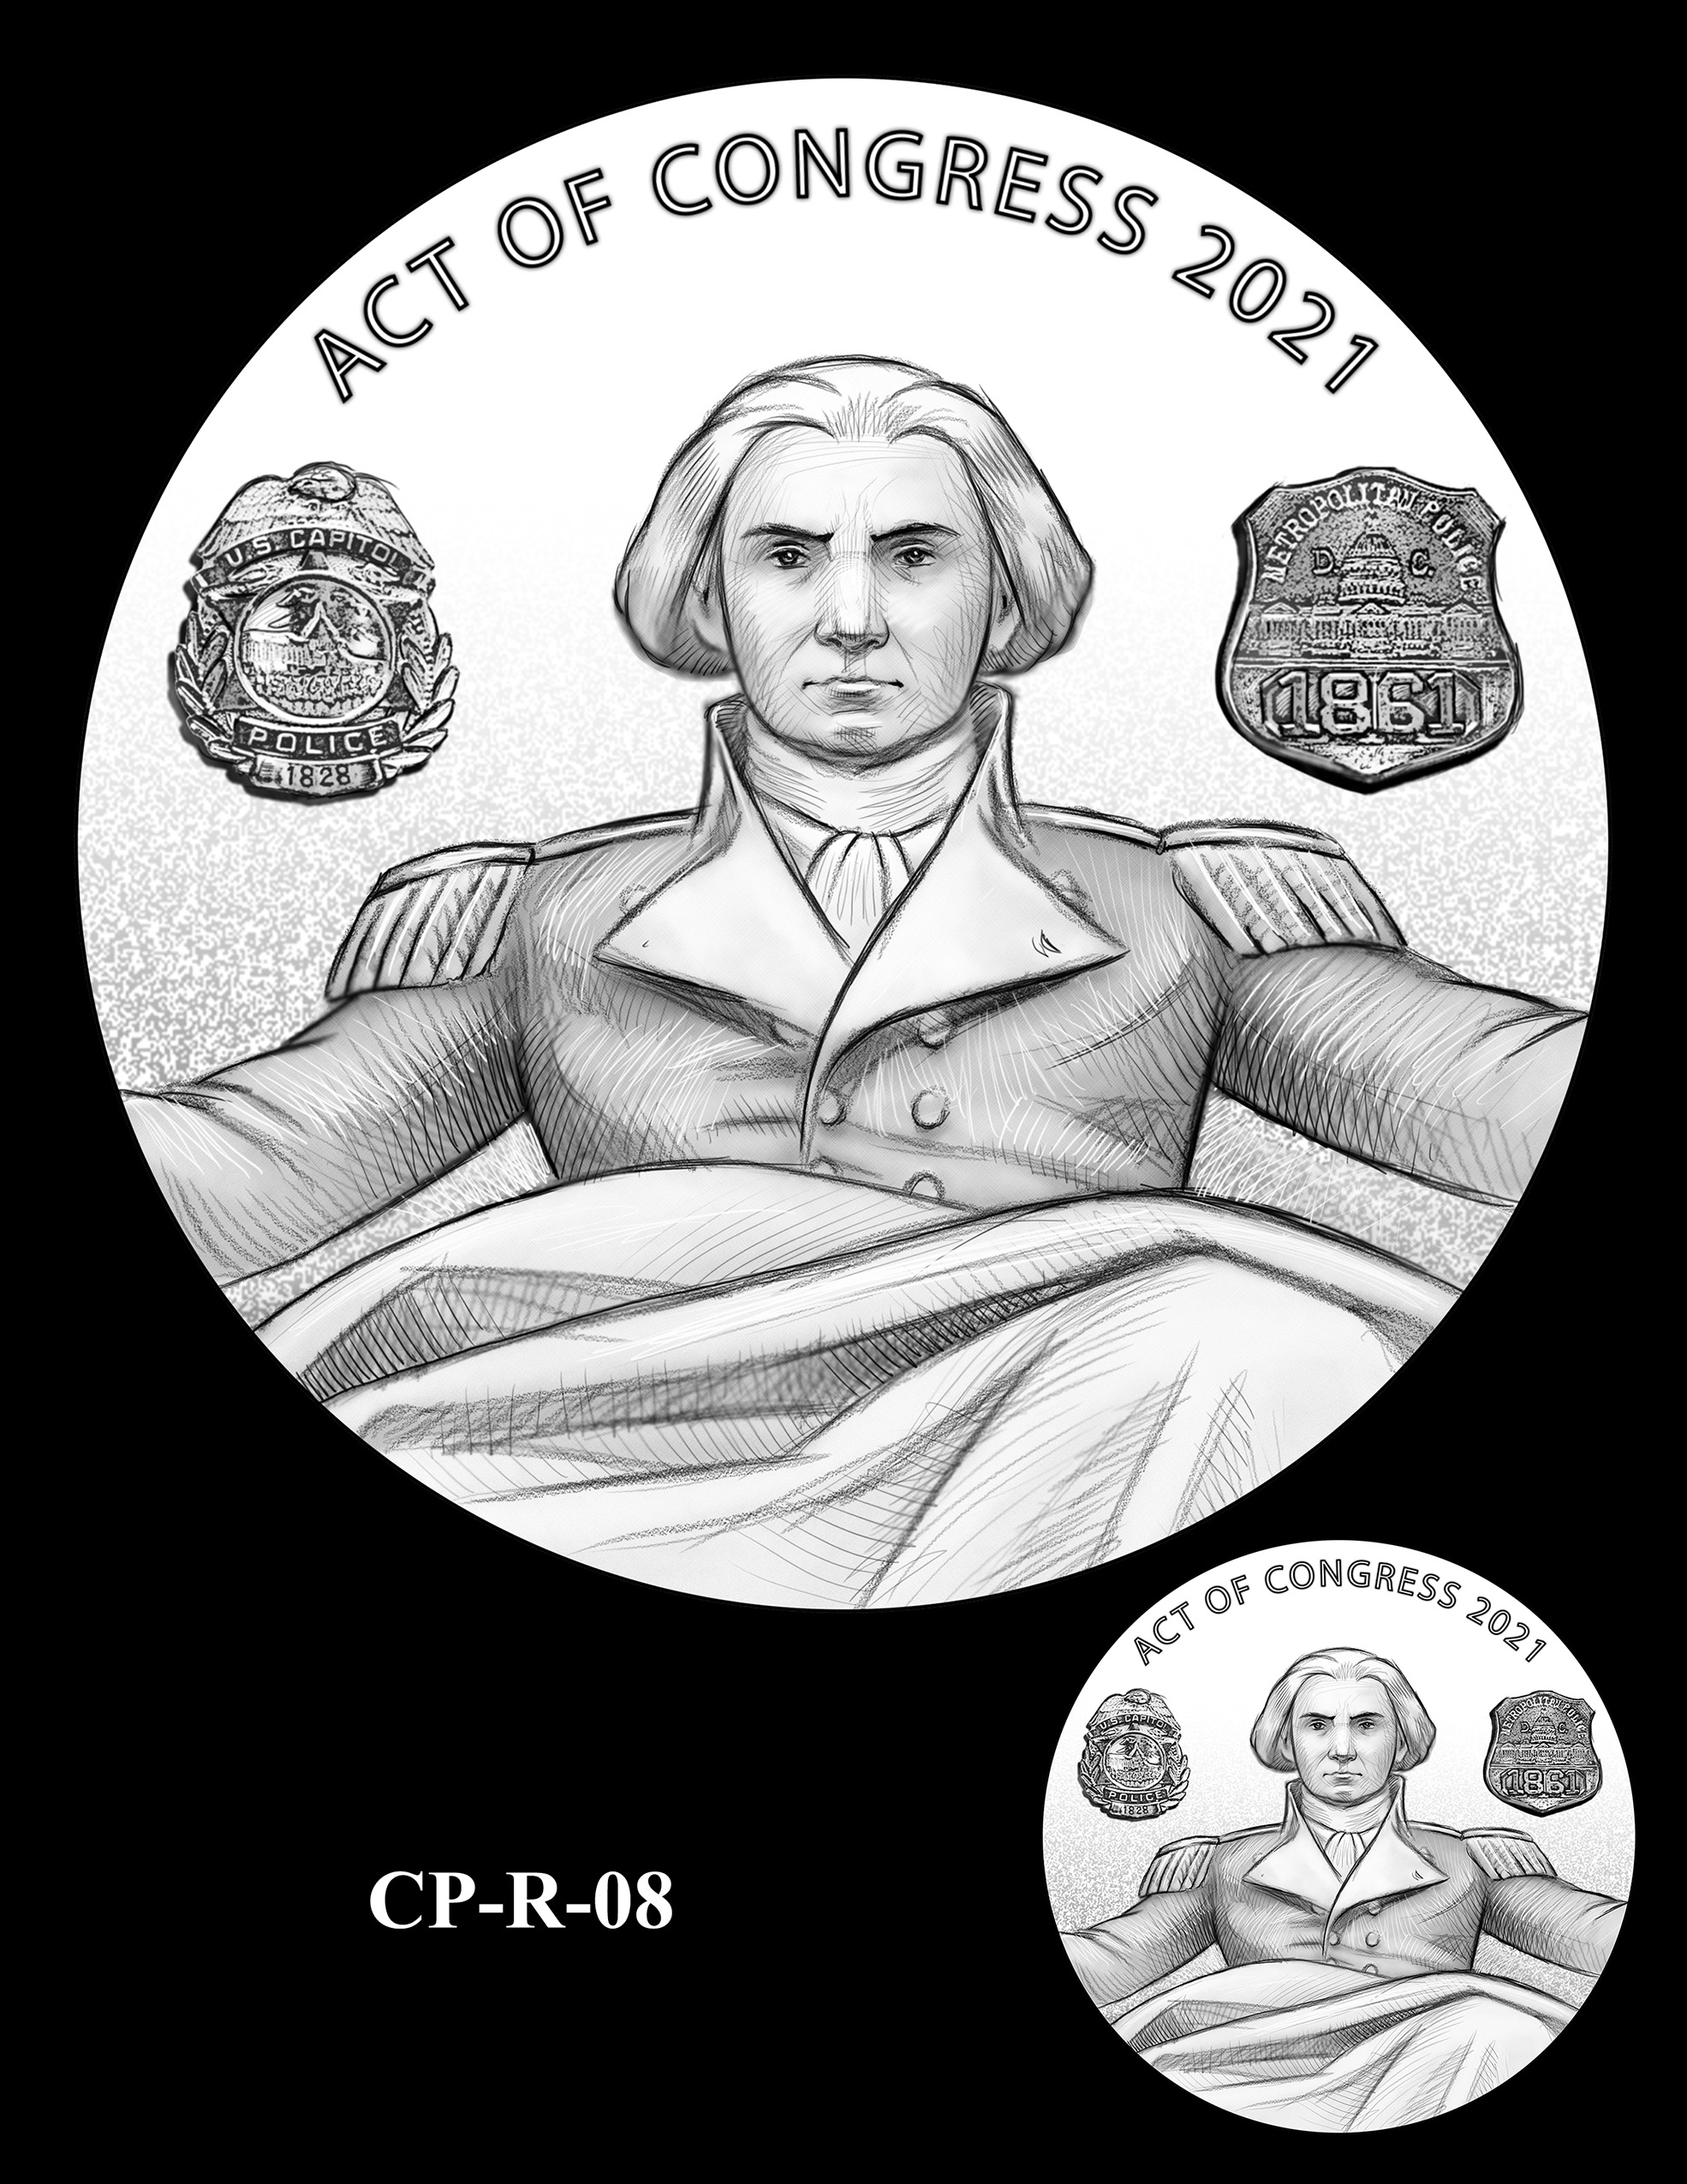 CP-R-08 -- Congressional Gold Medal for Those Who Protected the U.S. Capitol on January 6th 2021